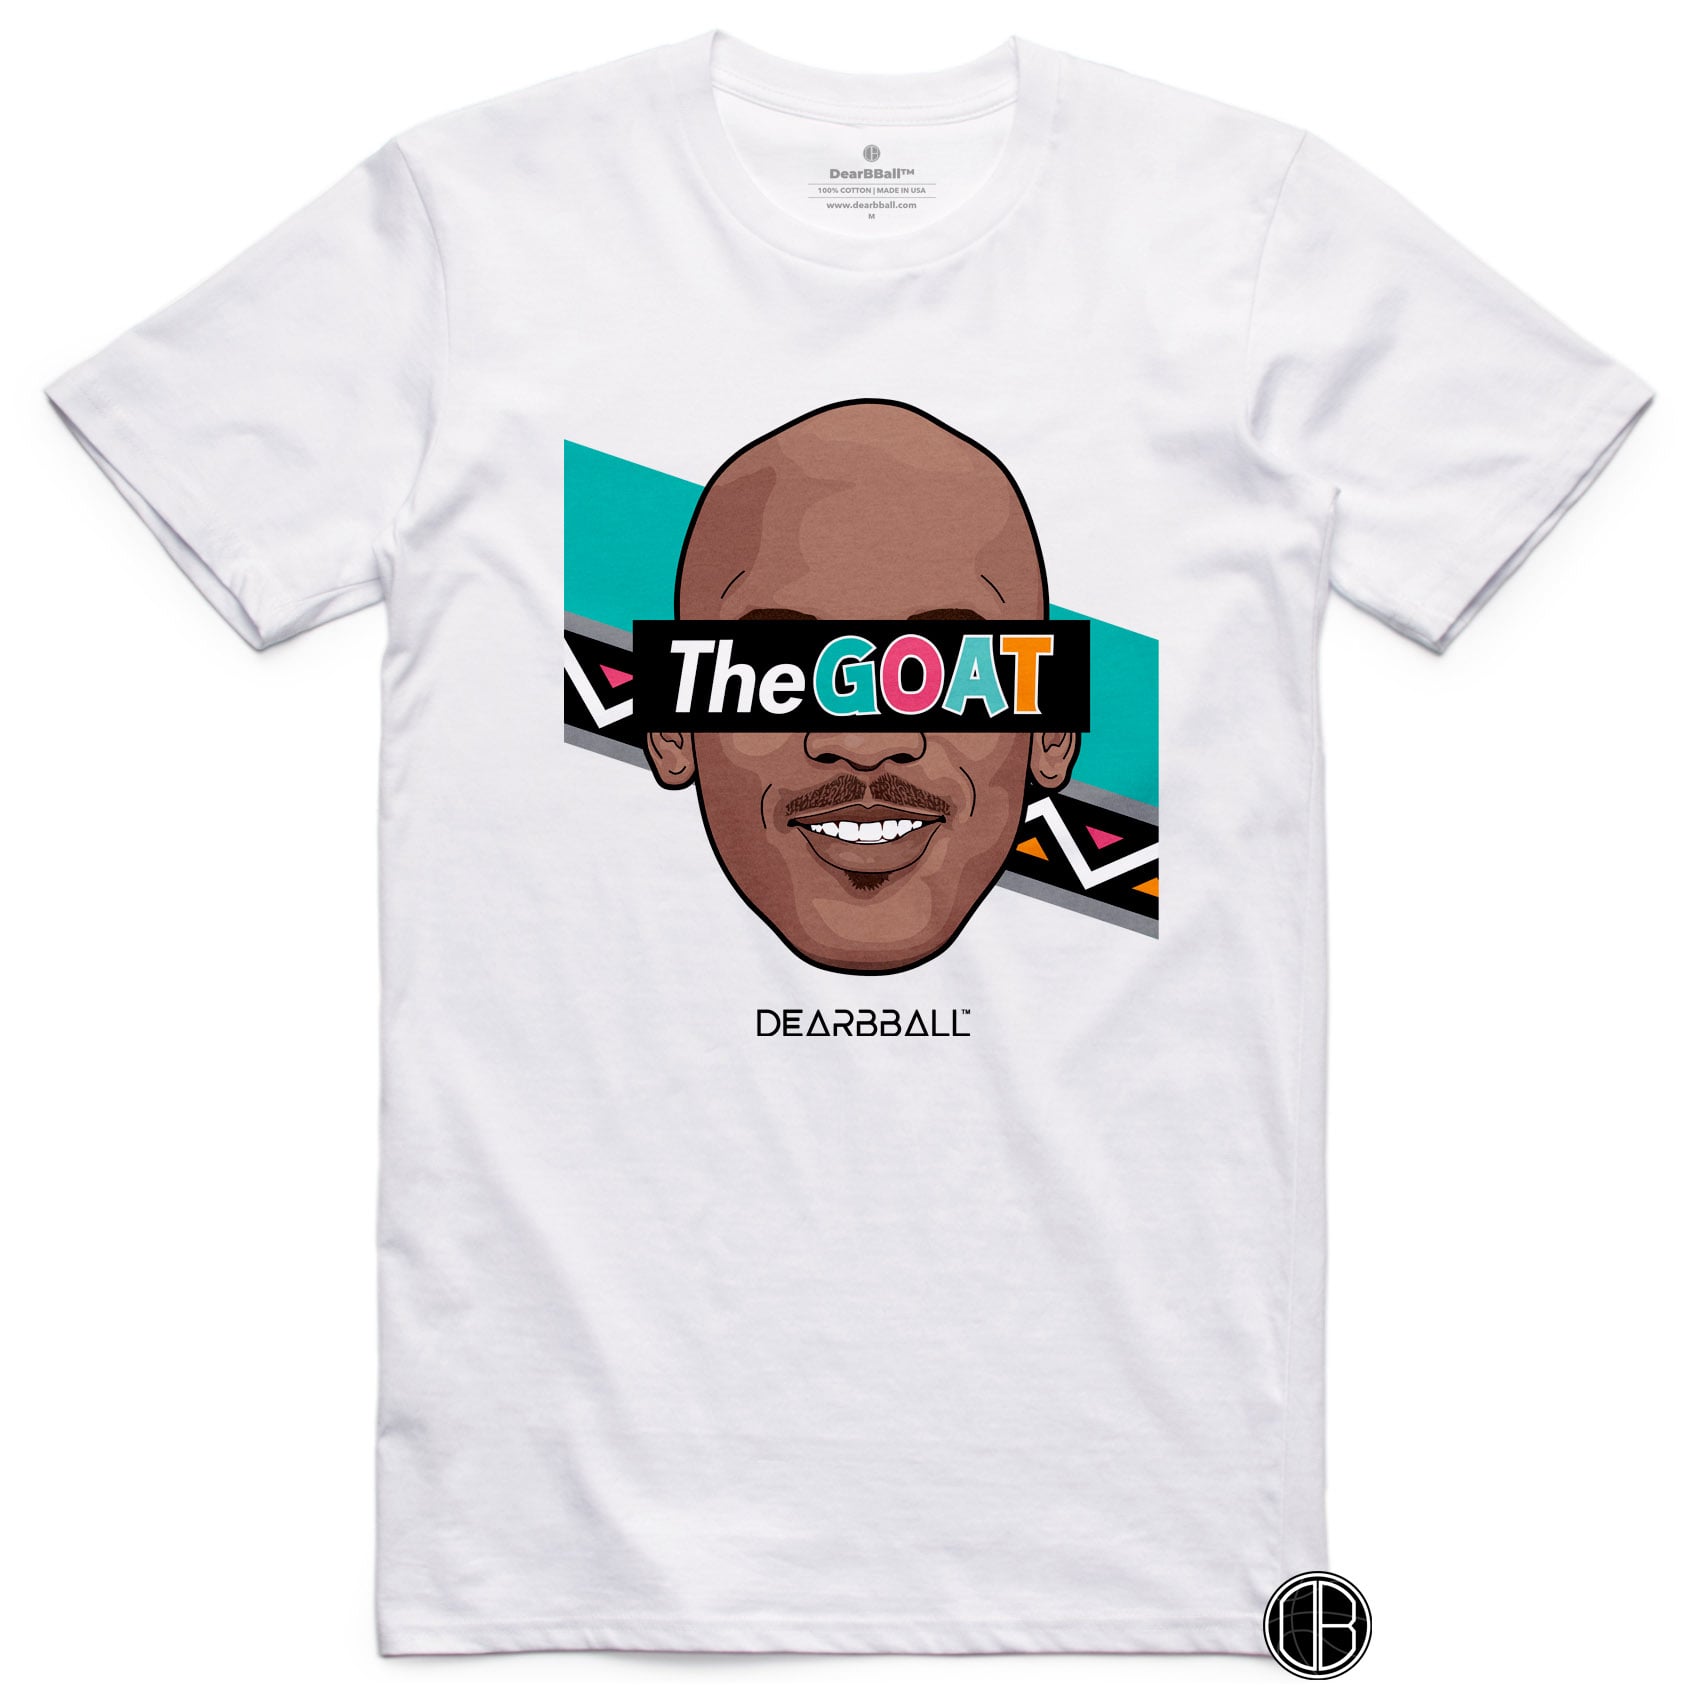 DearBBall T-Shirt - TheGOAT 1996 All Star Game Edition